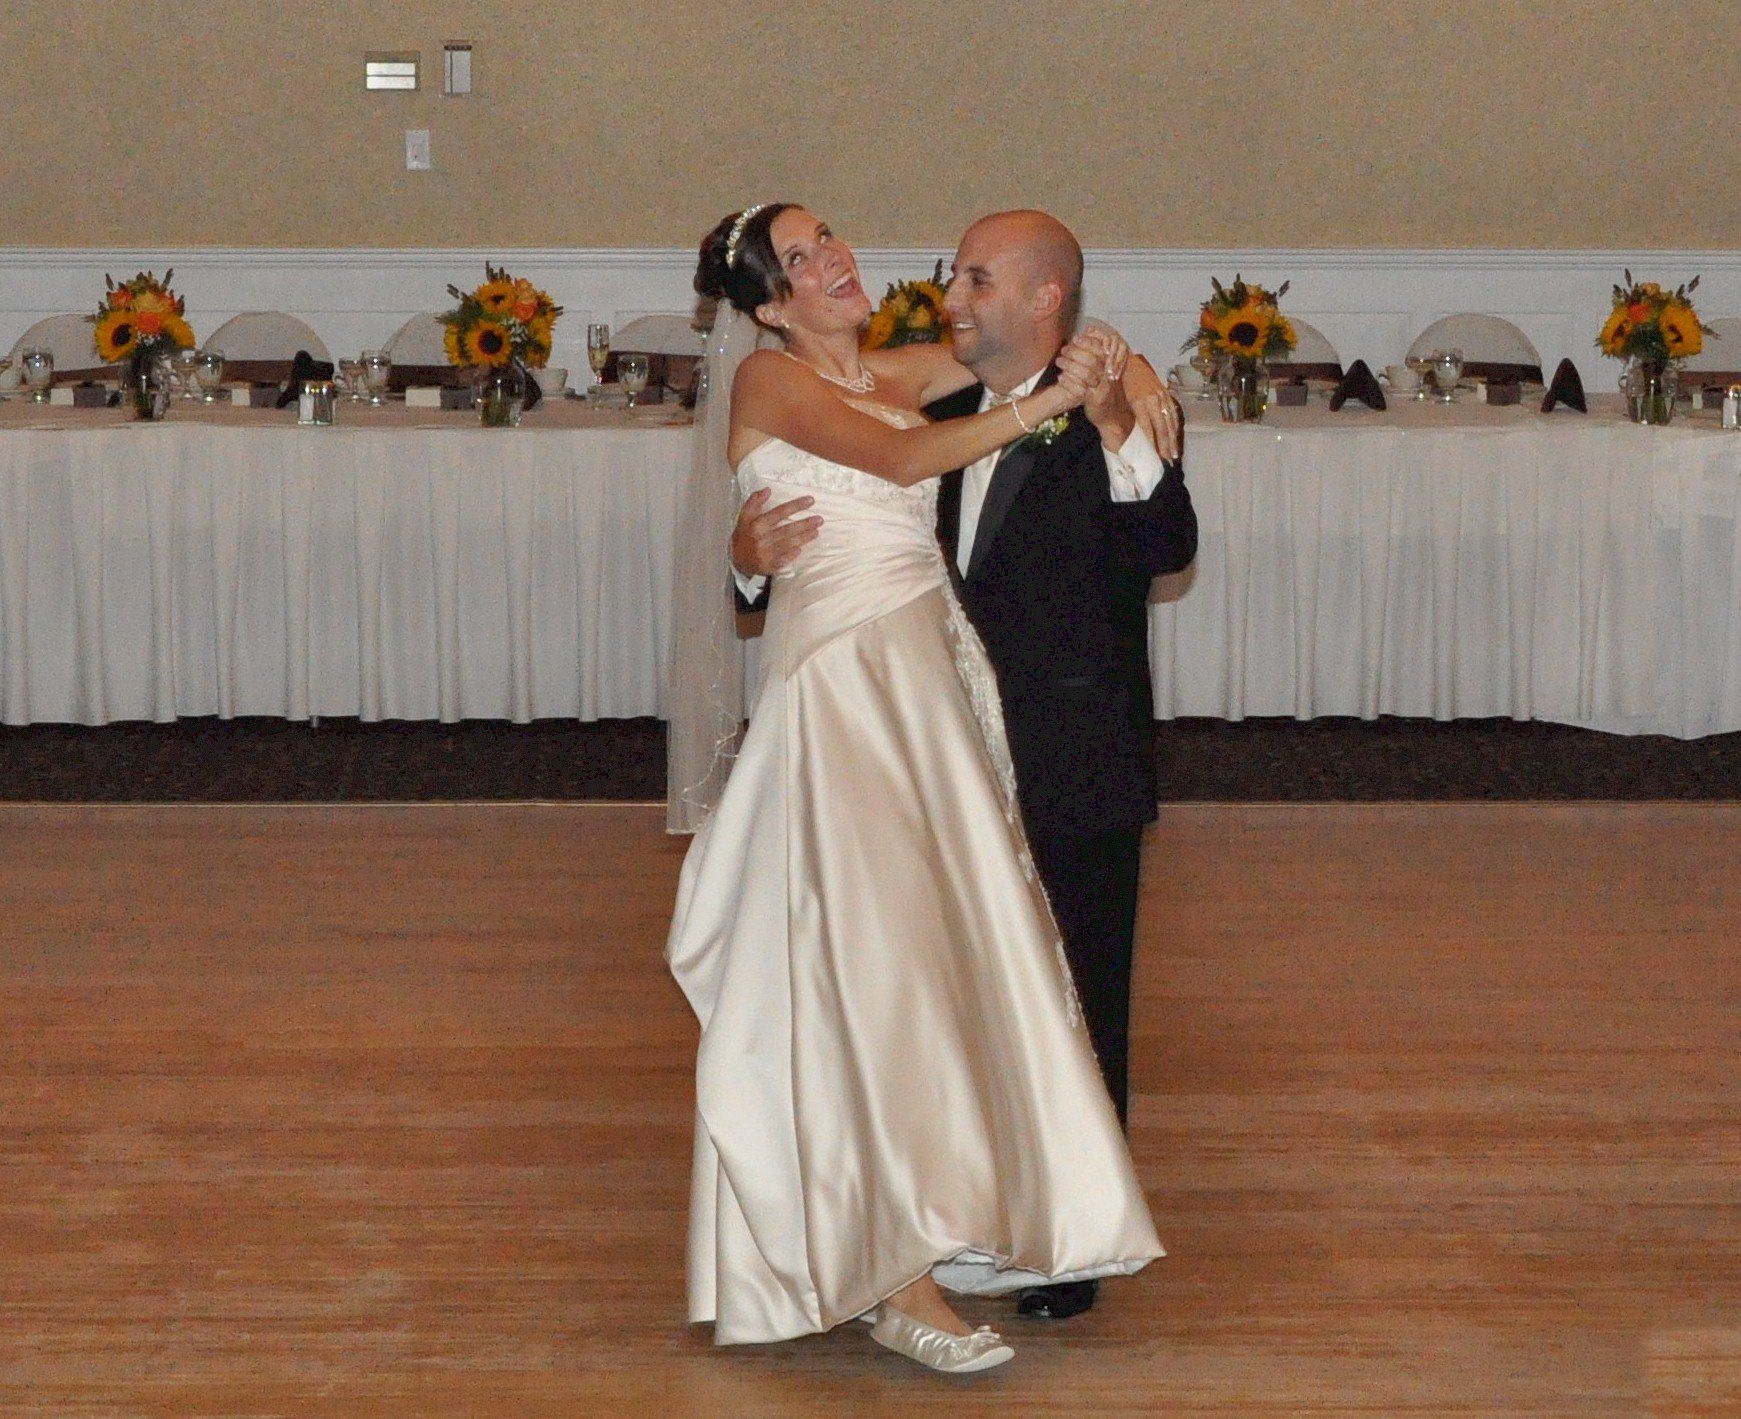 MA wedding DJ first dance at Hillview Country Club, North Reading, Massachusetts